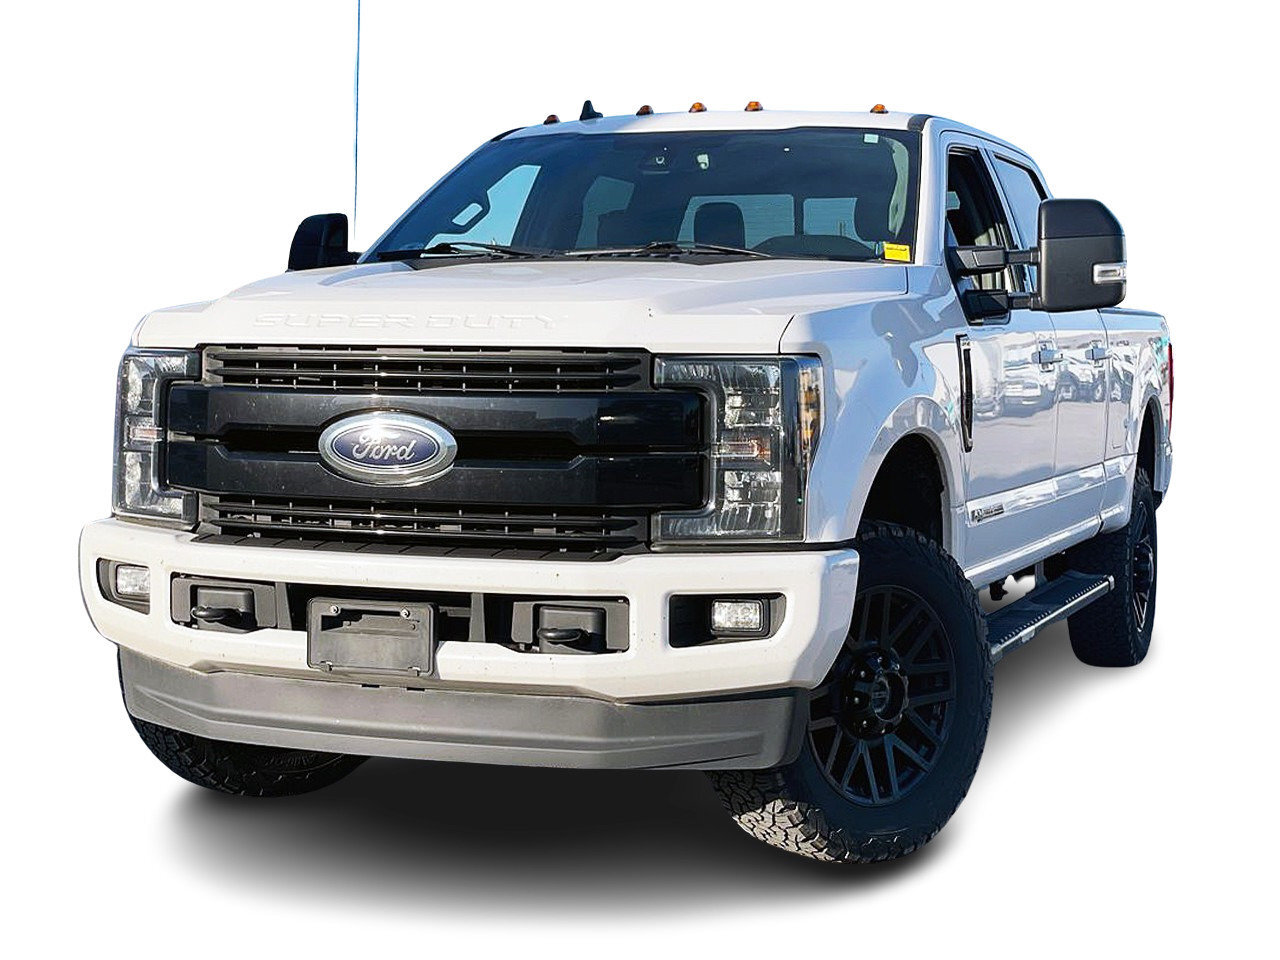 2019 Ford F-250 4x4 - Crew Cab Lariat - 160 WB Certified | Tow Hit